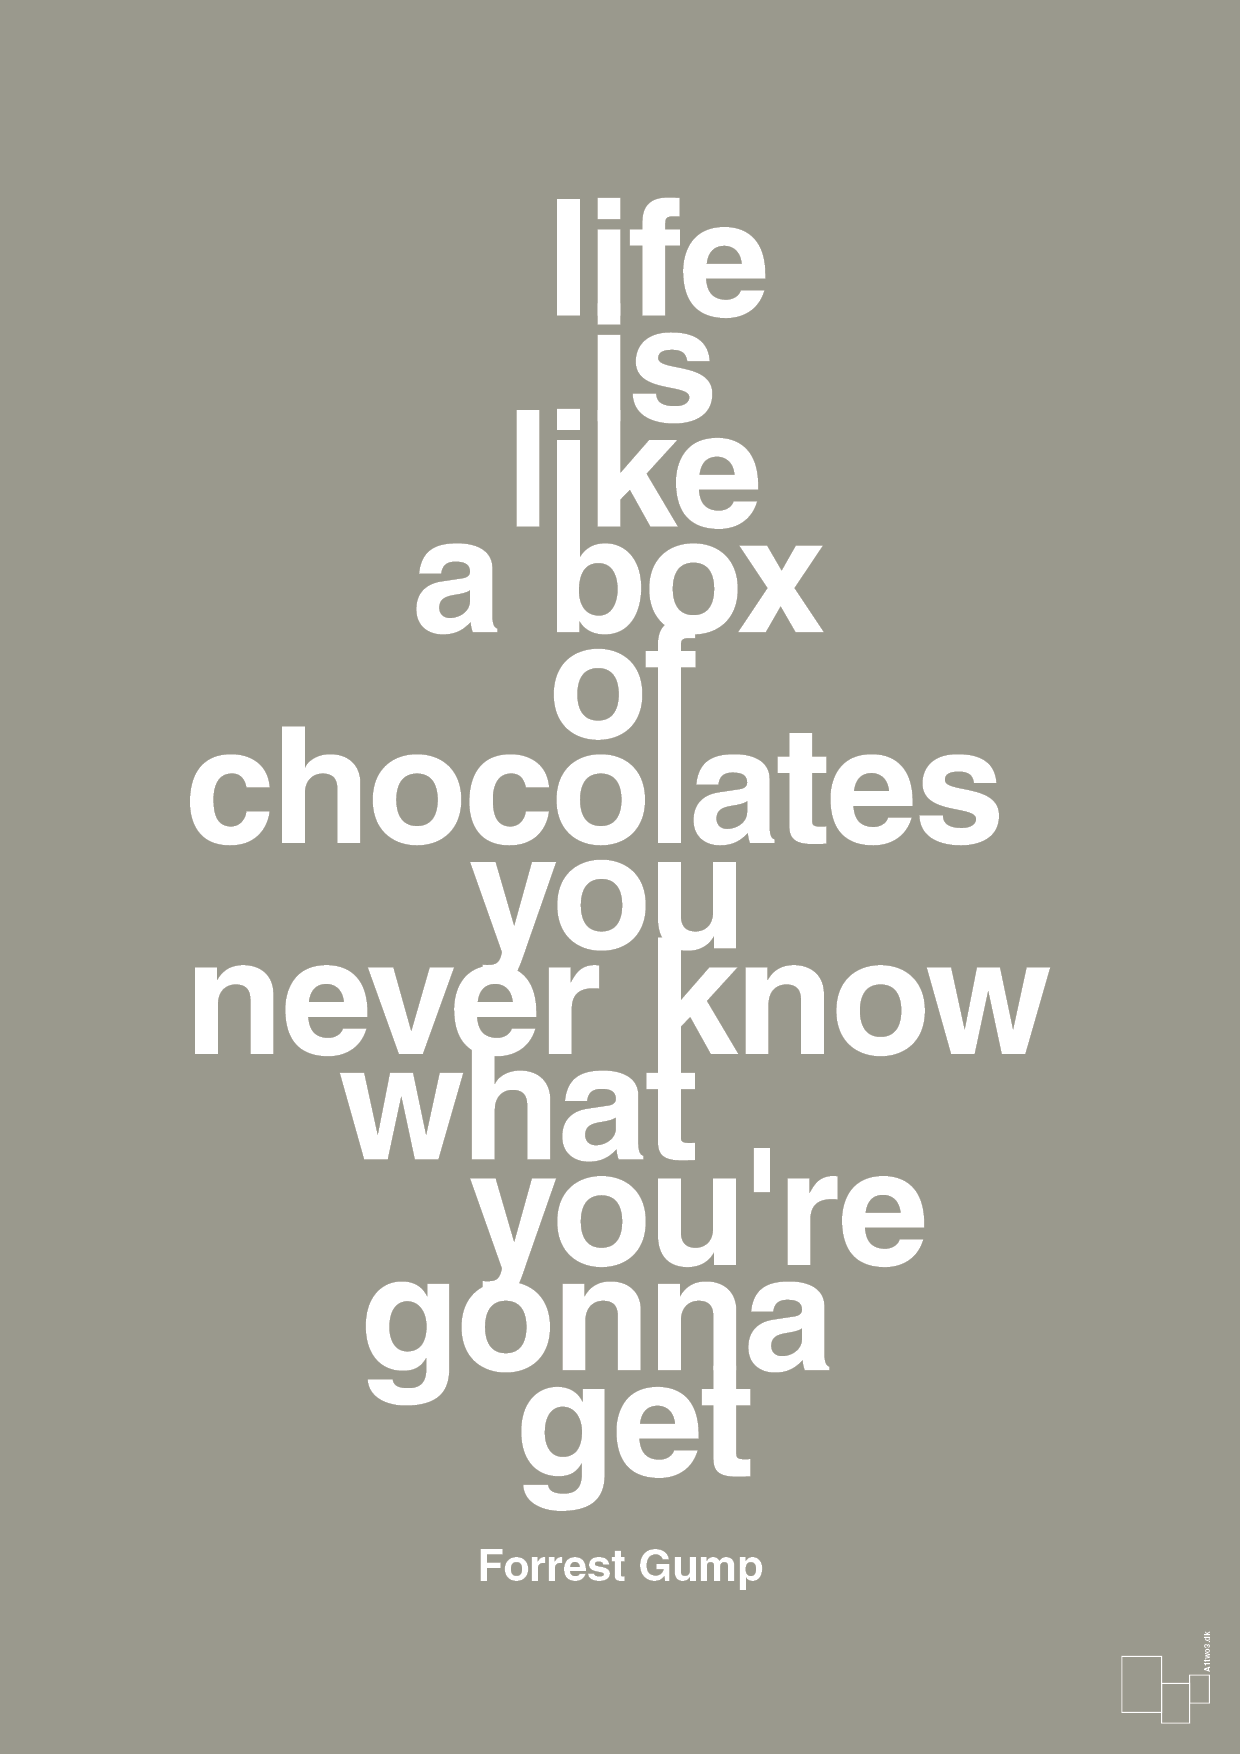 life is like a box of chocolates you never know what you're gonna get - Plakat med Citater i Battleship Gray